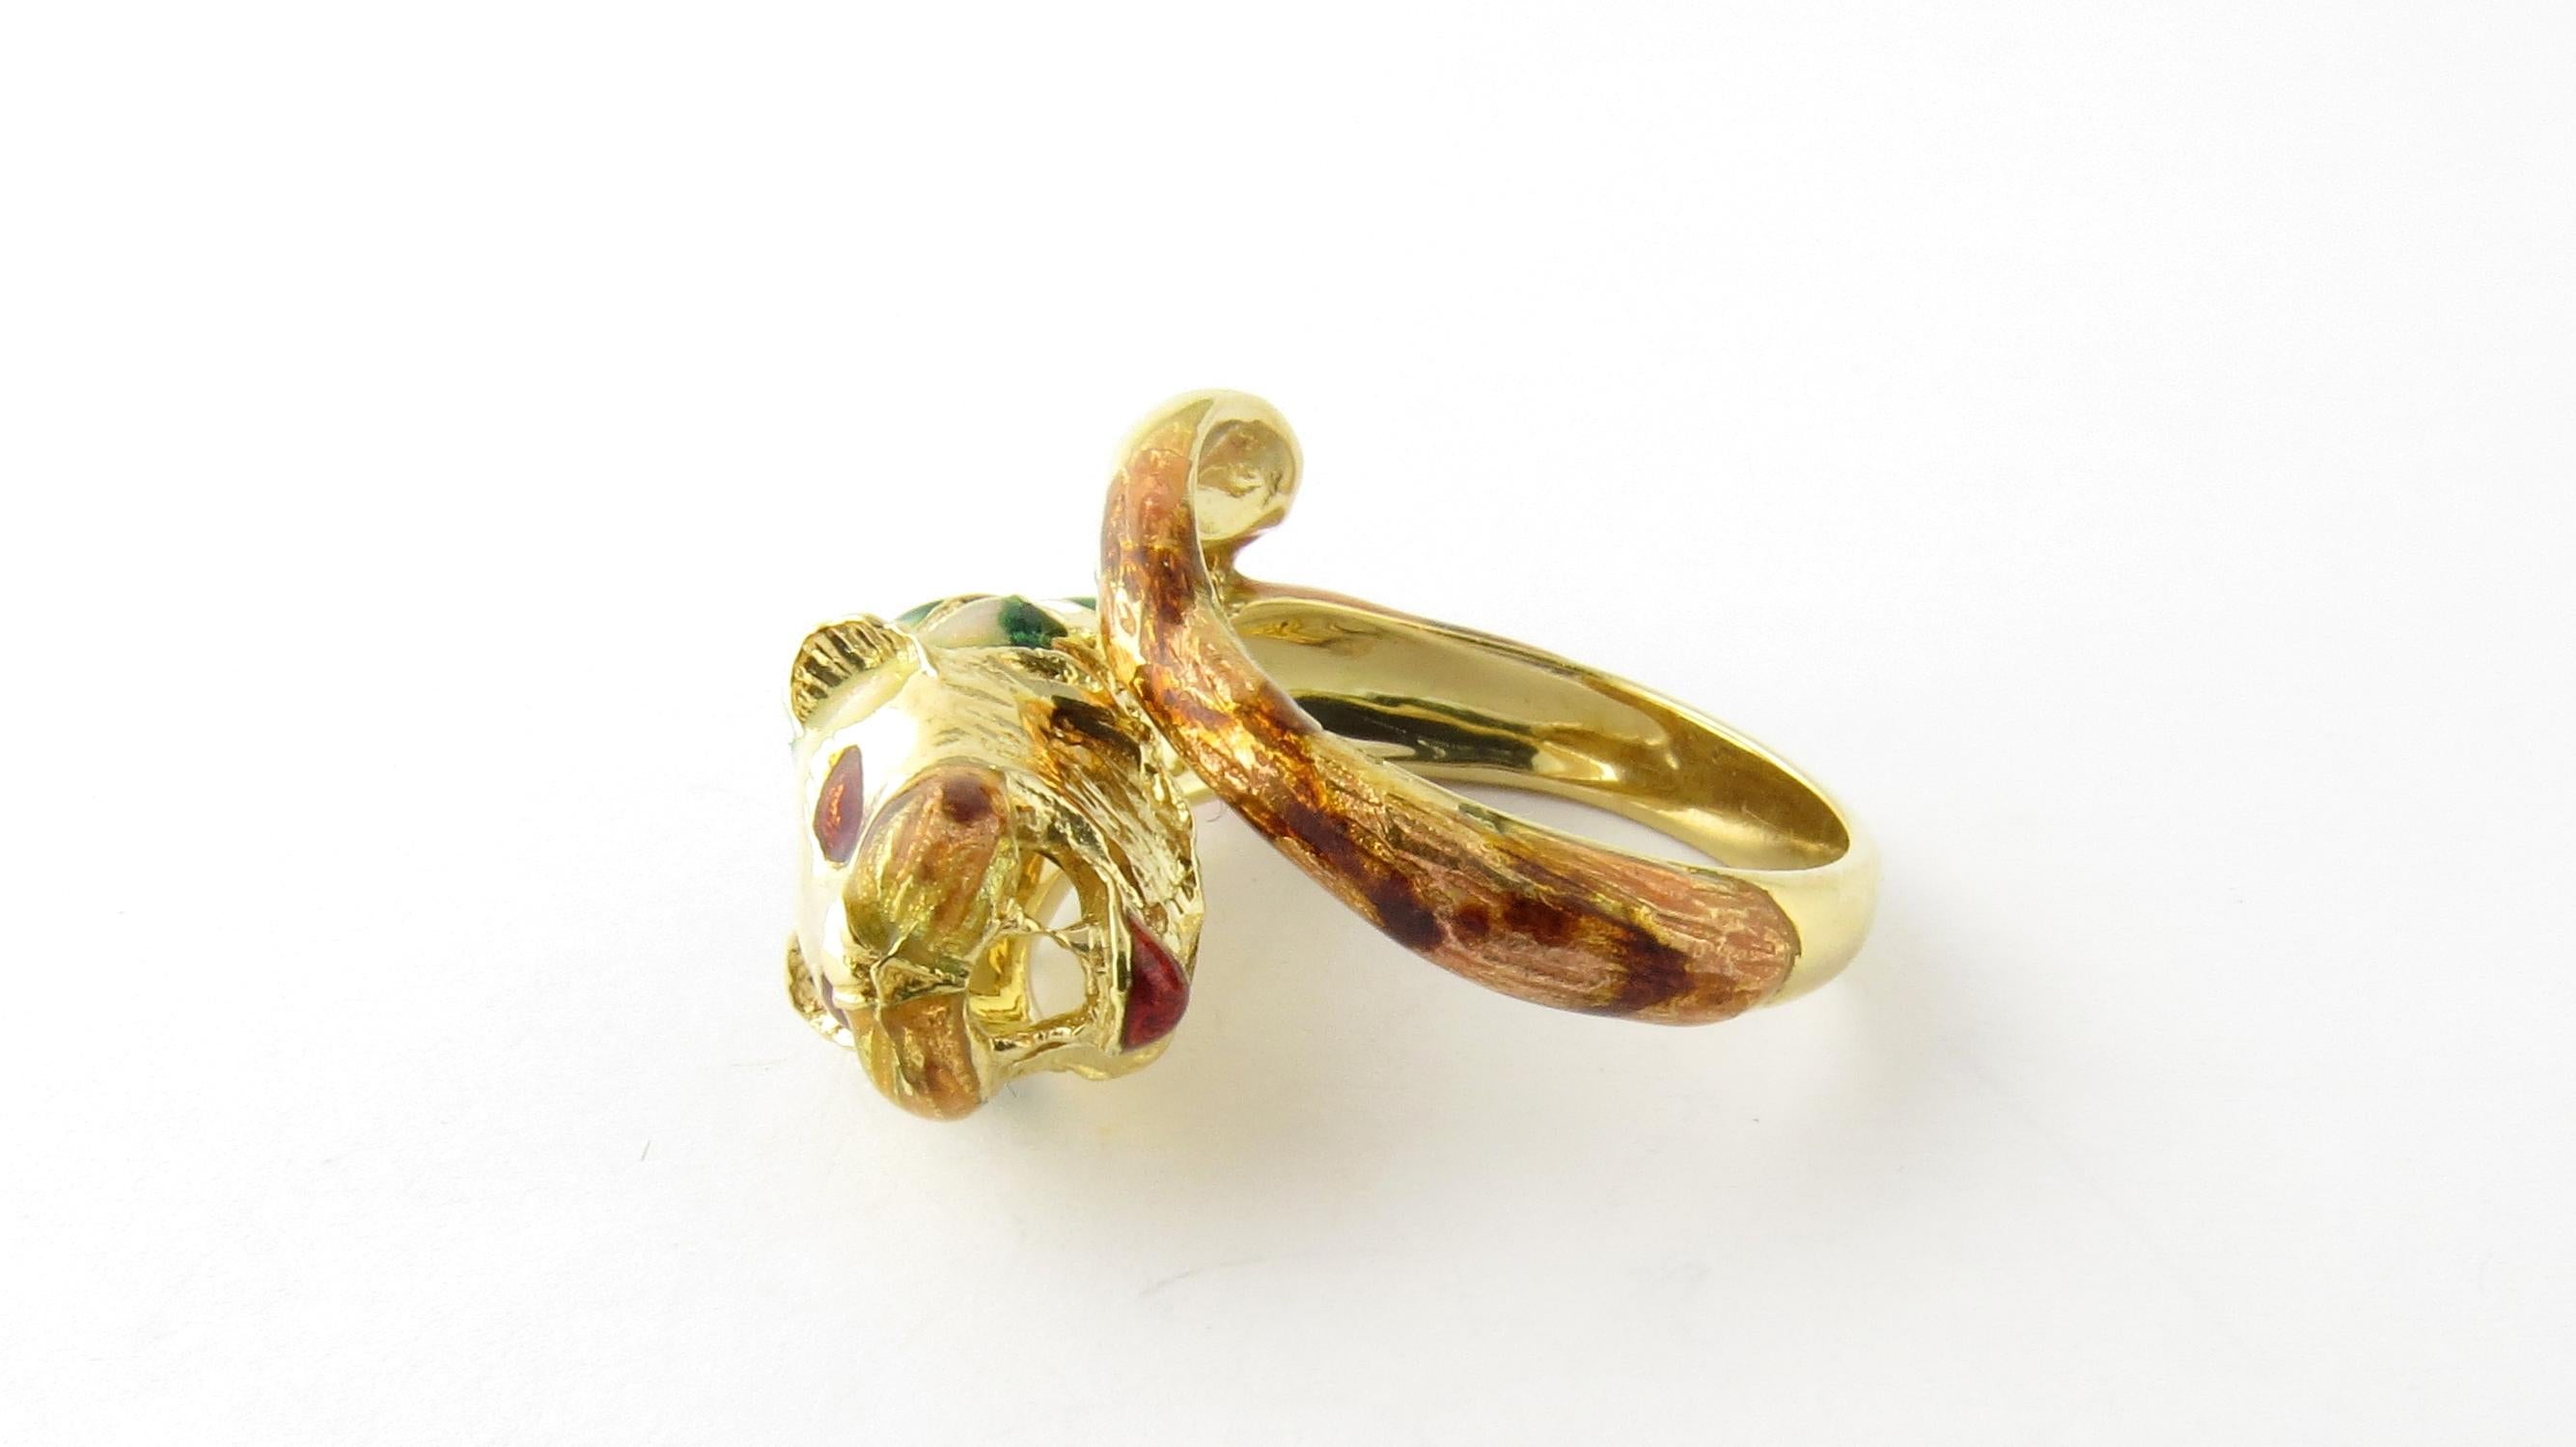 Vintage 18 Karat Yellow Gold Lion Head Ring Size 7

This elegant ring features a stunning lion accented with green, red and white enamel and crafted in classic 18K yellow gold. Width: 18 mm. Height: 9 mm. Shank: 3 mm.

Ring Size: 7

Weight: 6.2 dwt.